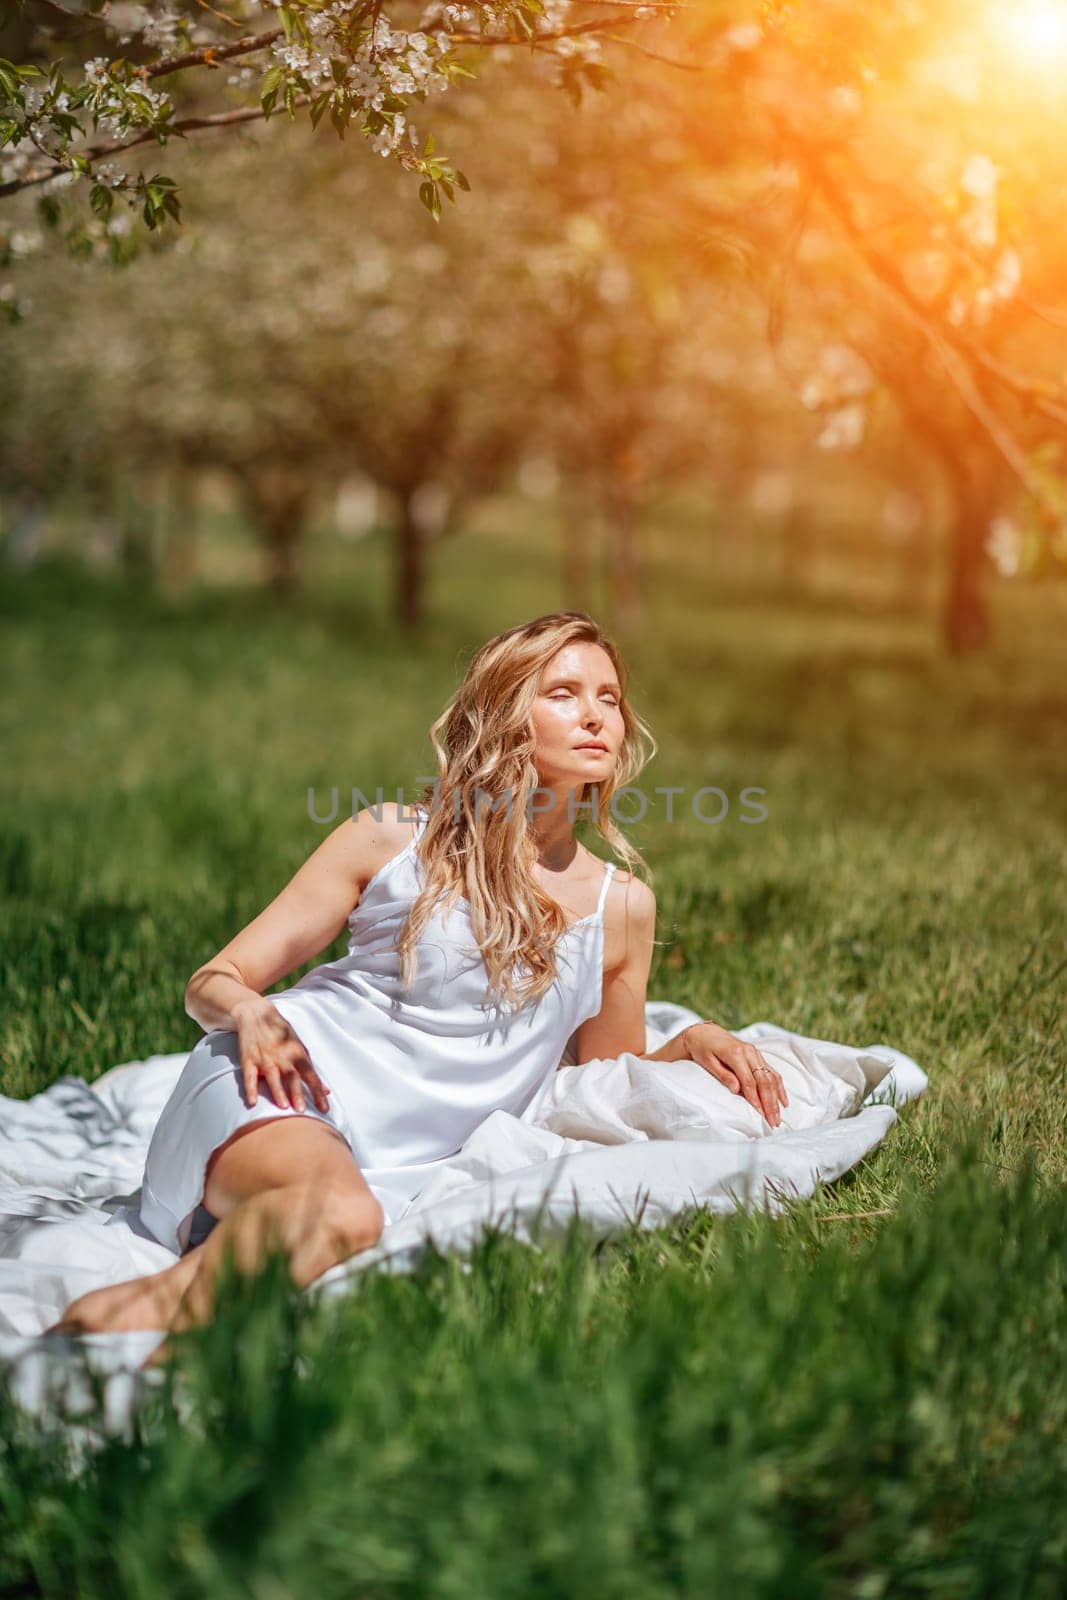 woman garden. she sleeps on a white bed in the fresh spring grass in the garden. Dressed in a blue nightgown